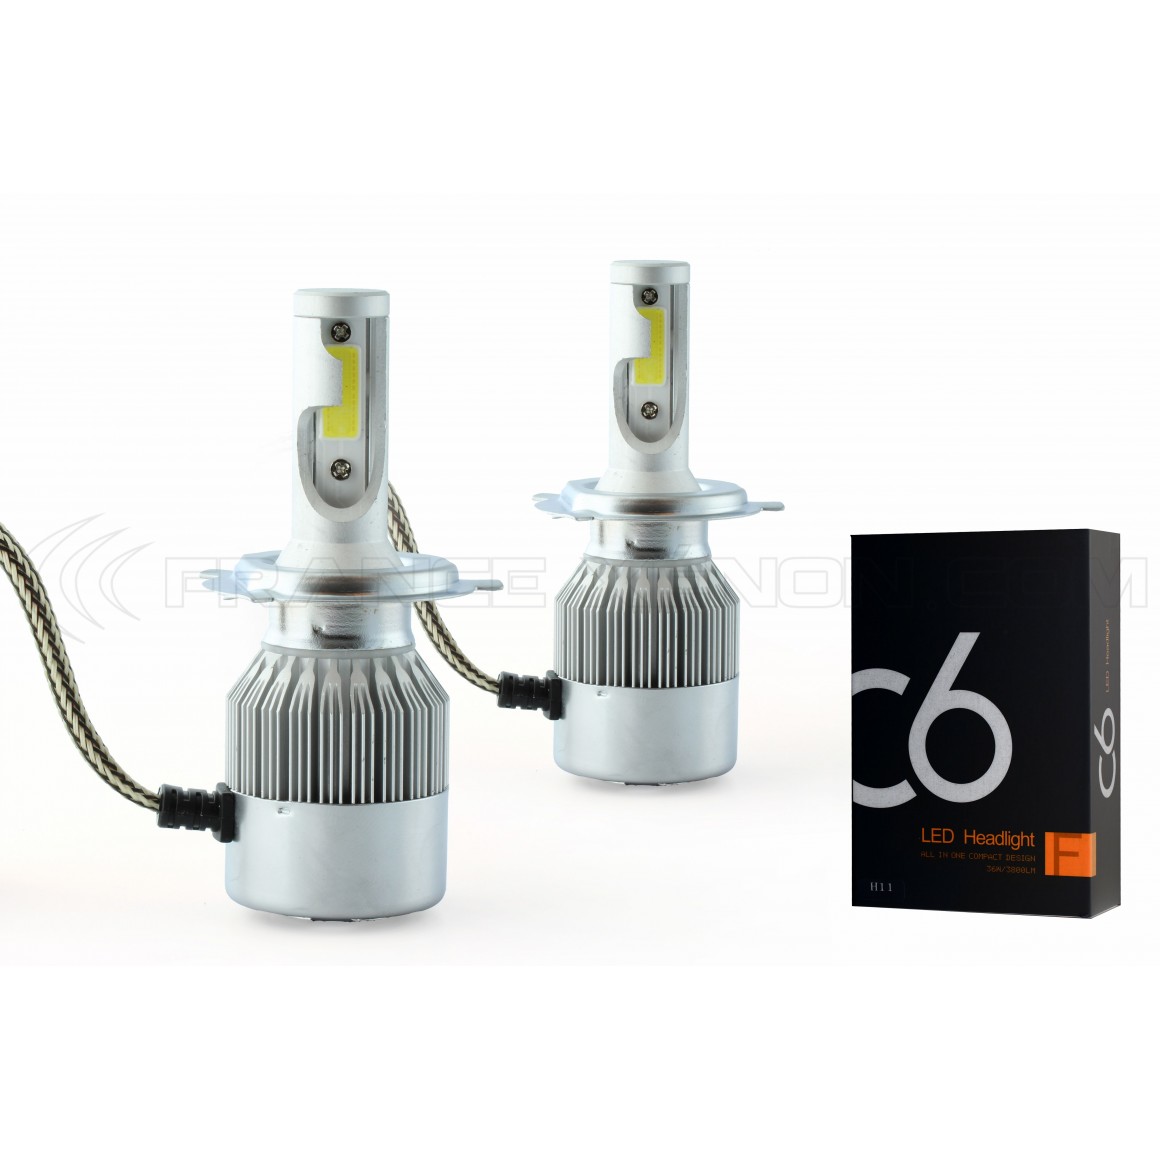 Stereotype Dignified Peregrination 2 x bulbs h4 bi-ventilated cob led c6 - 3800lm - 12v / 24v - France-Xenon